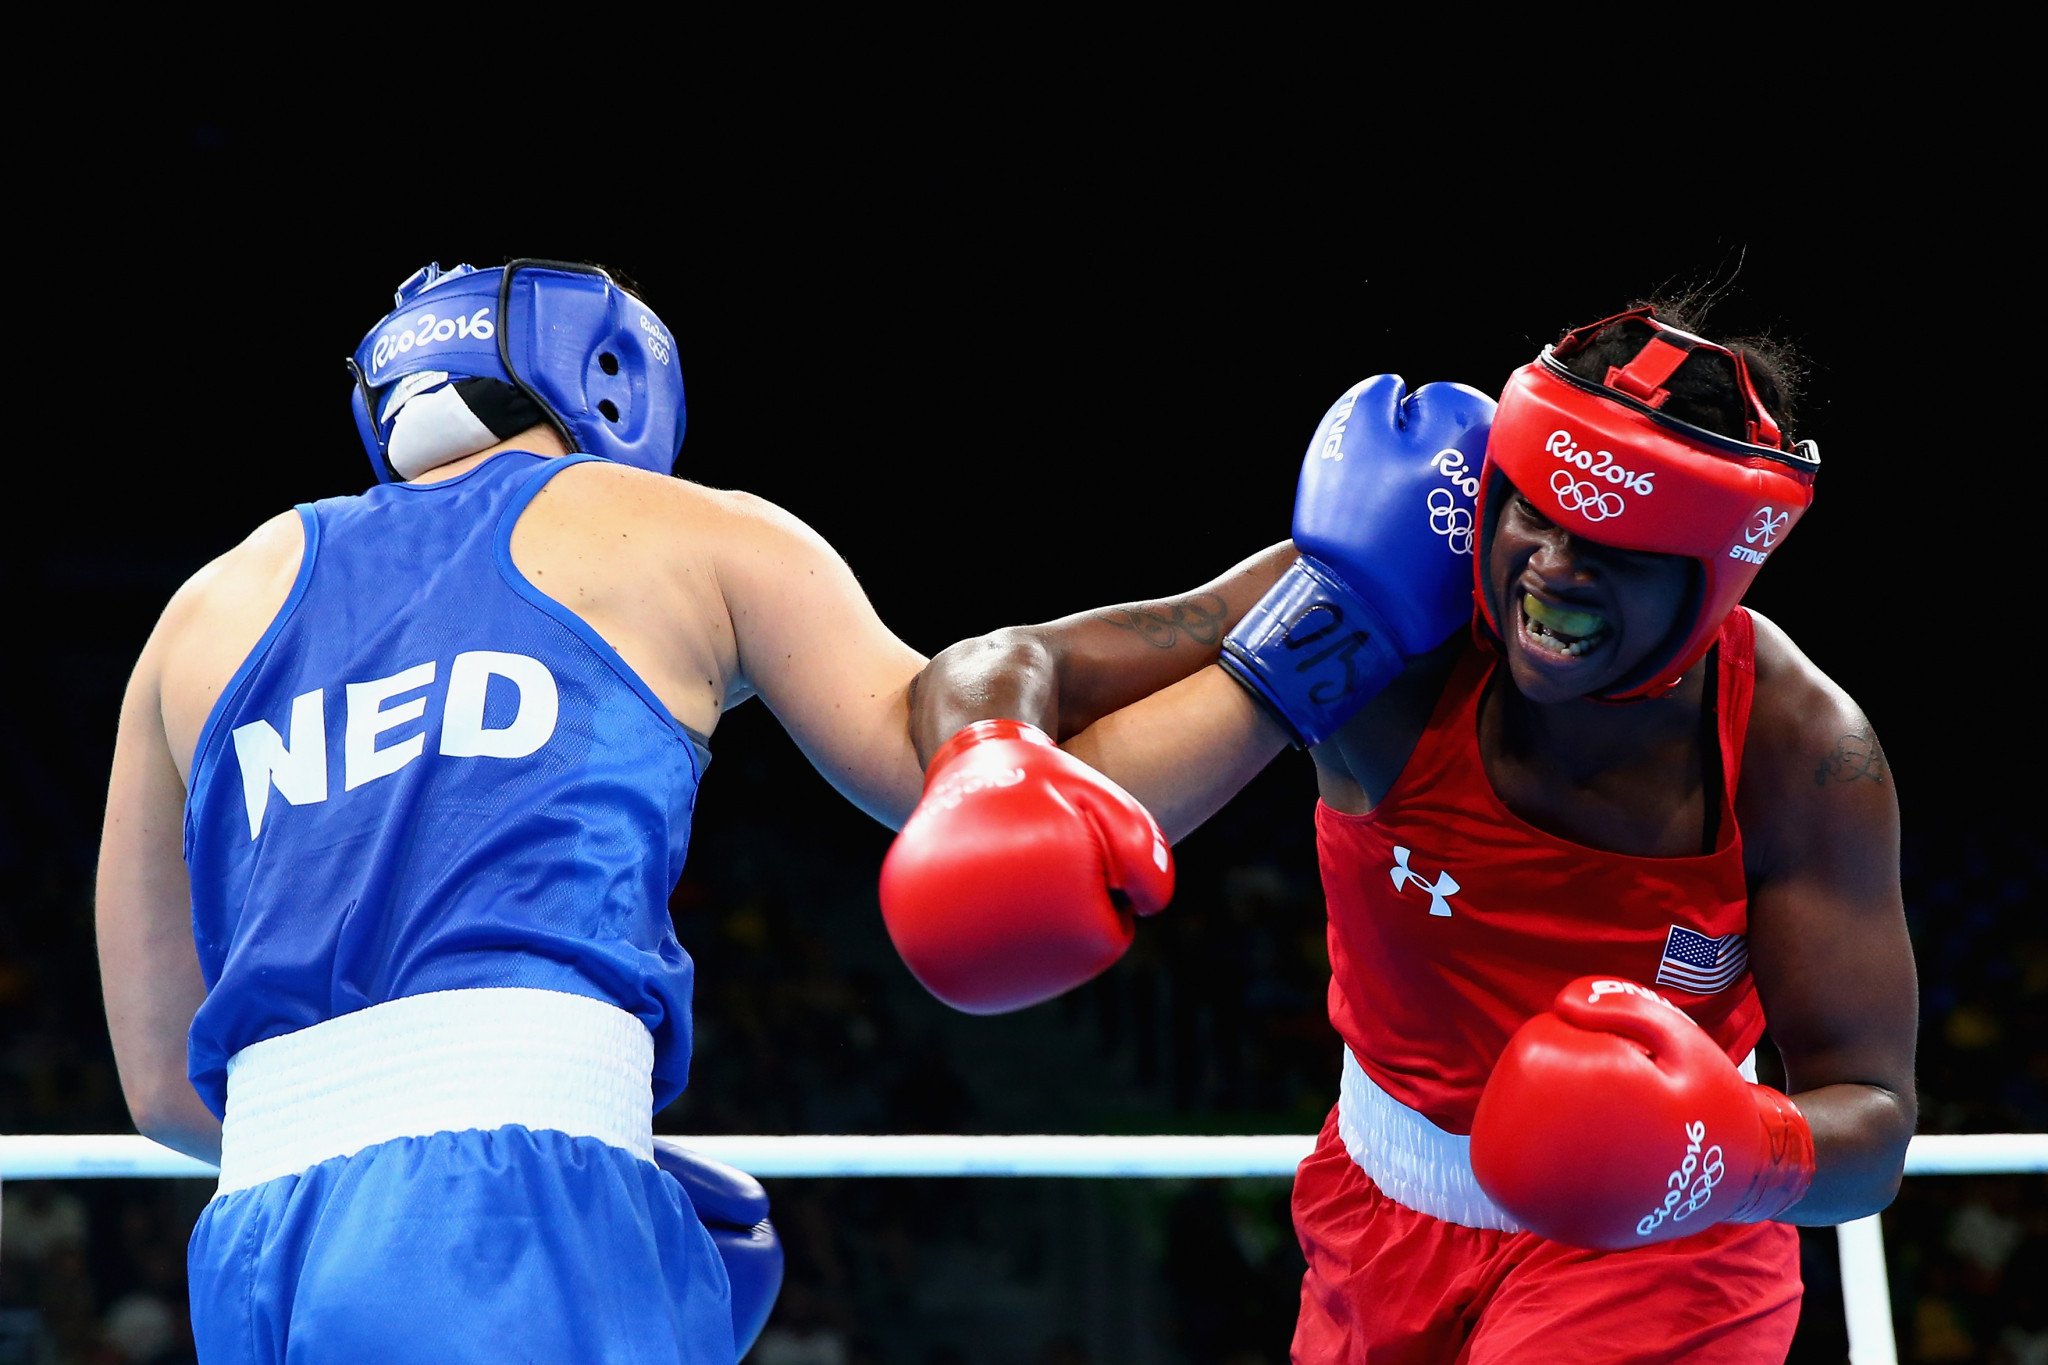 The programme could be seen as an effort to boost the number of female boxers competing ©Getty Images